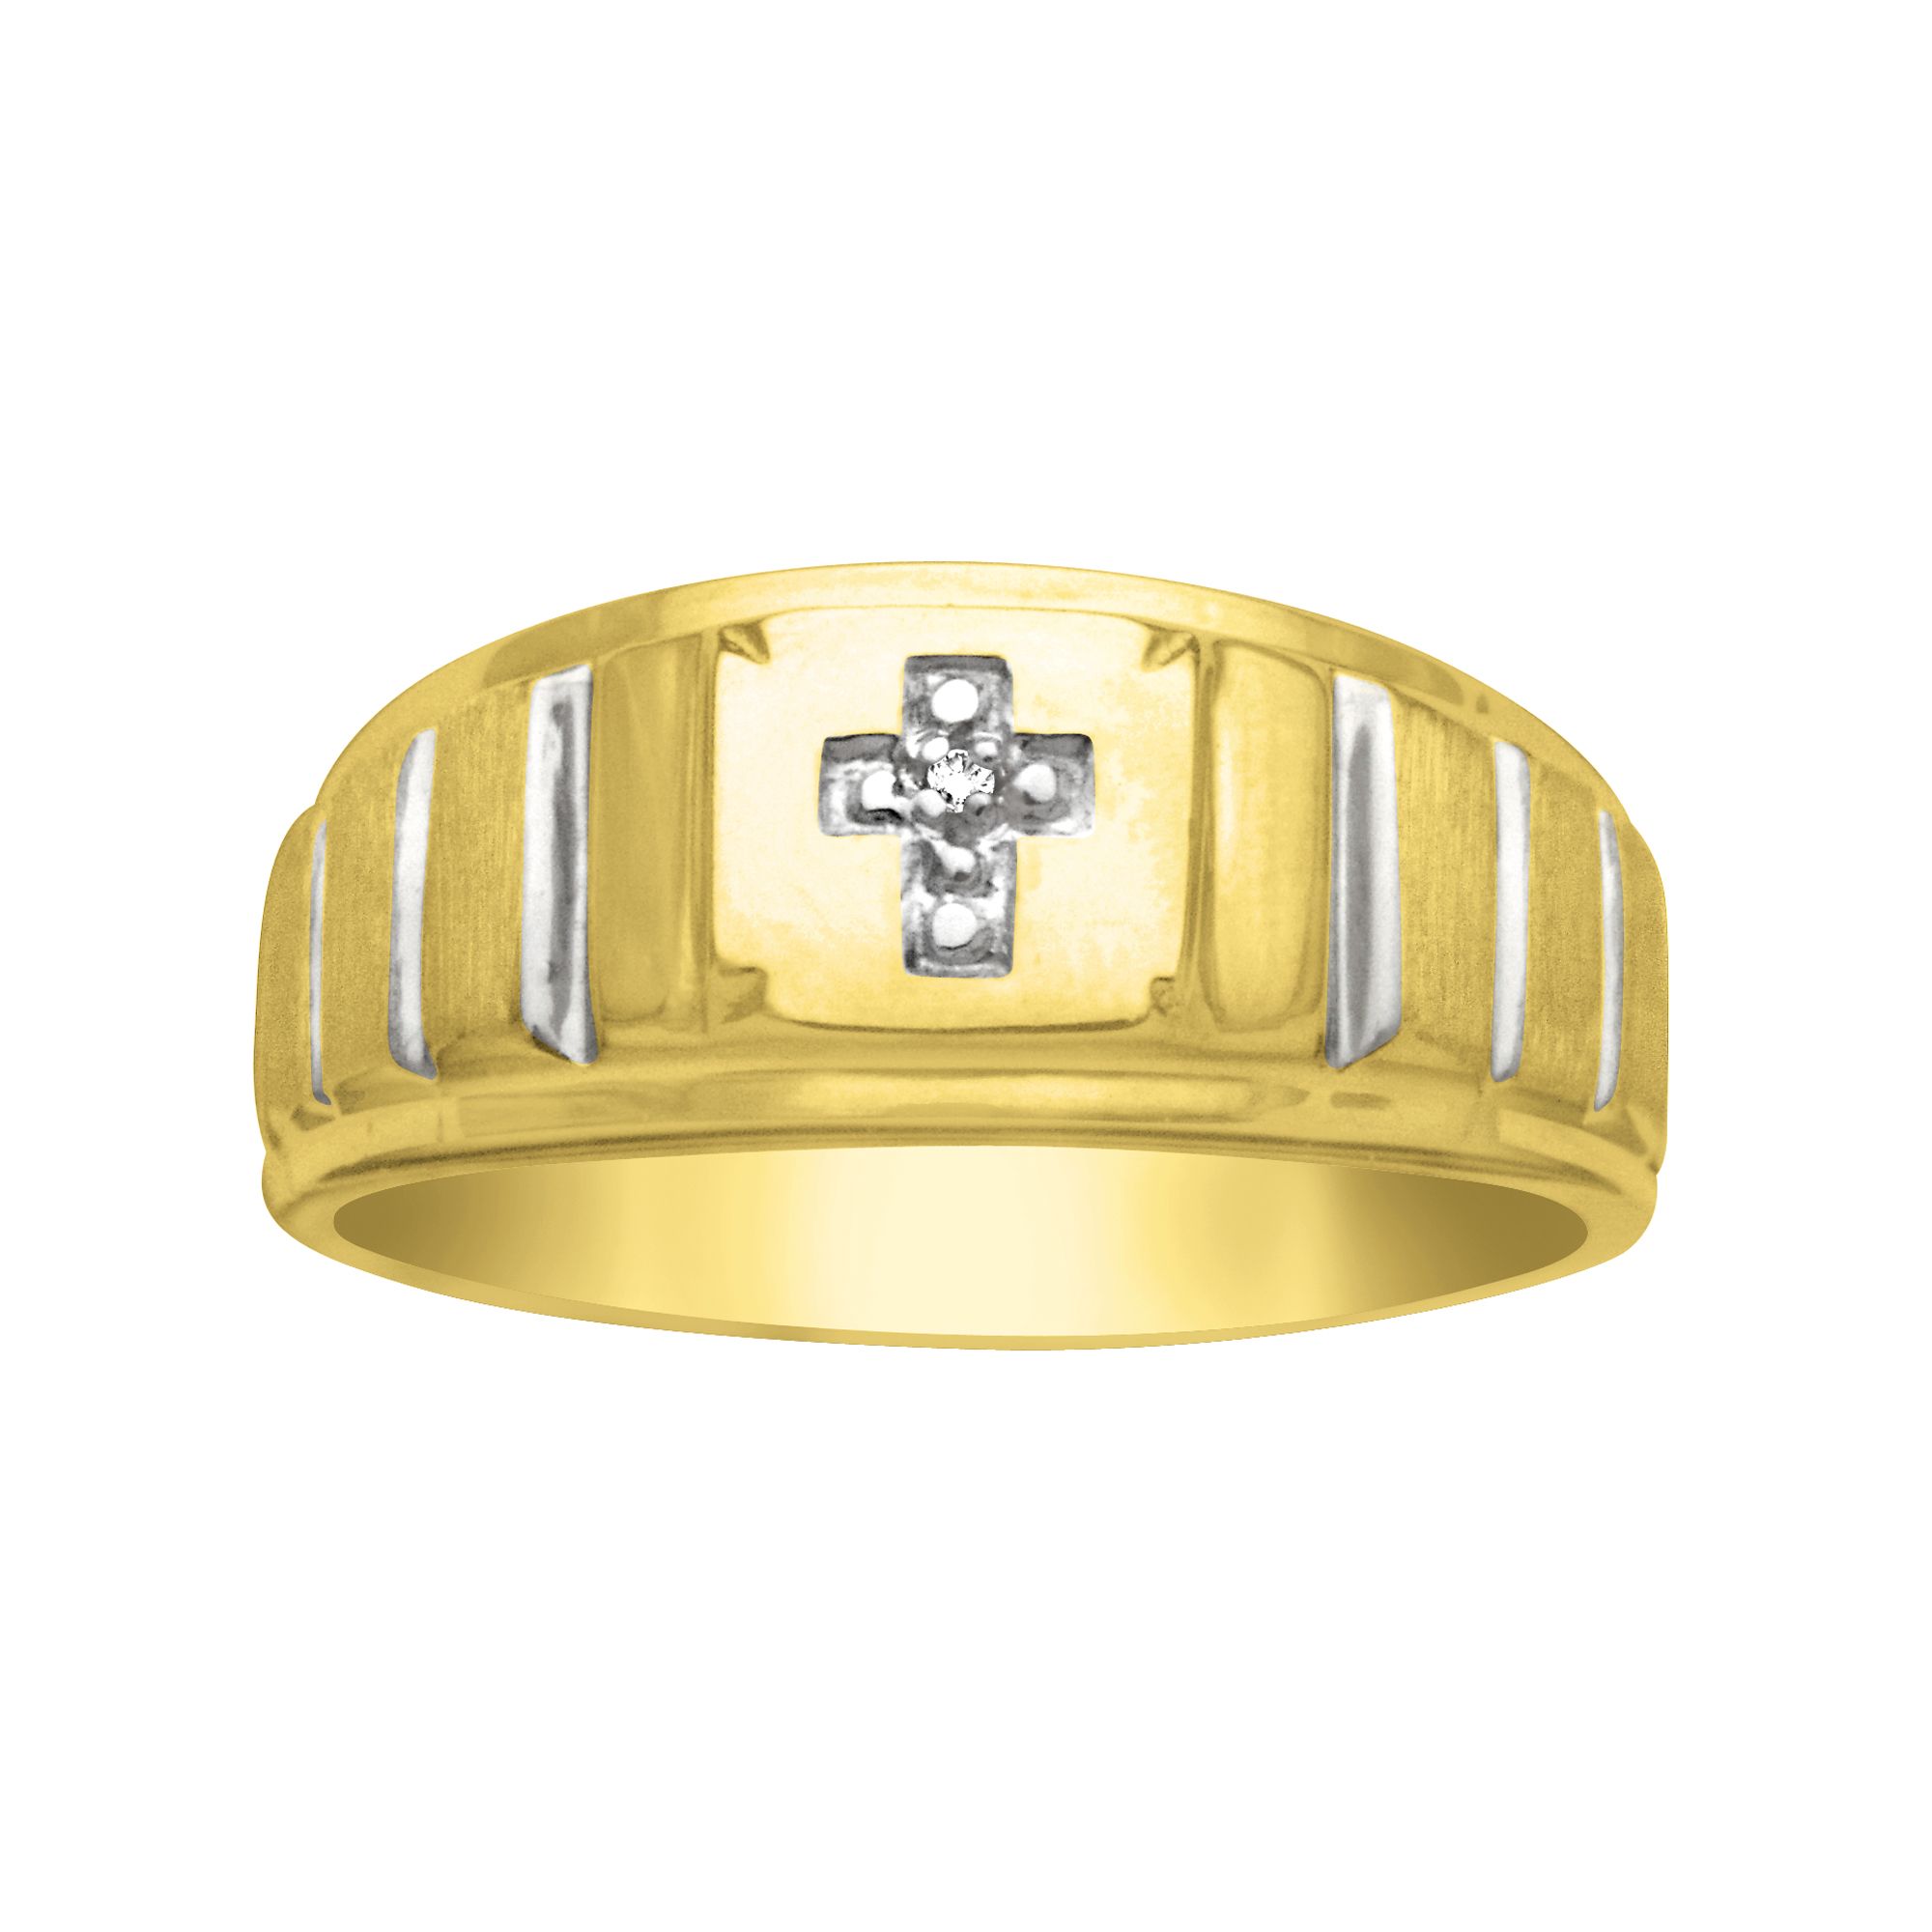 Mens Diamond Accent Cross Ring in 18K Gold Over Sterling Silver